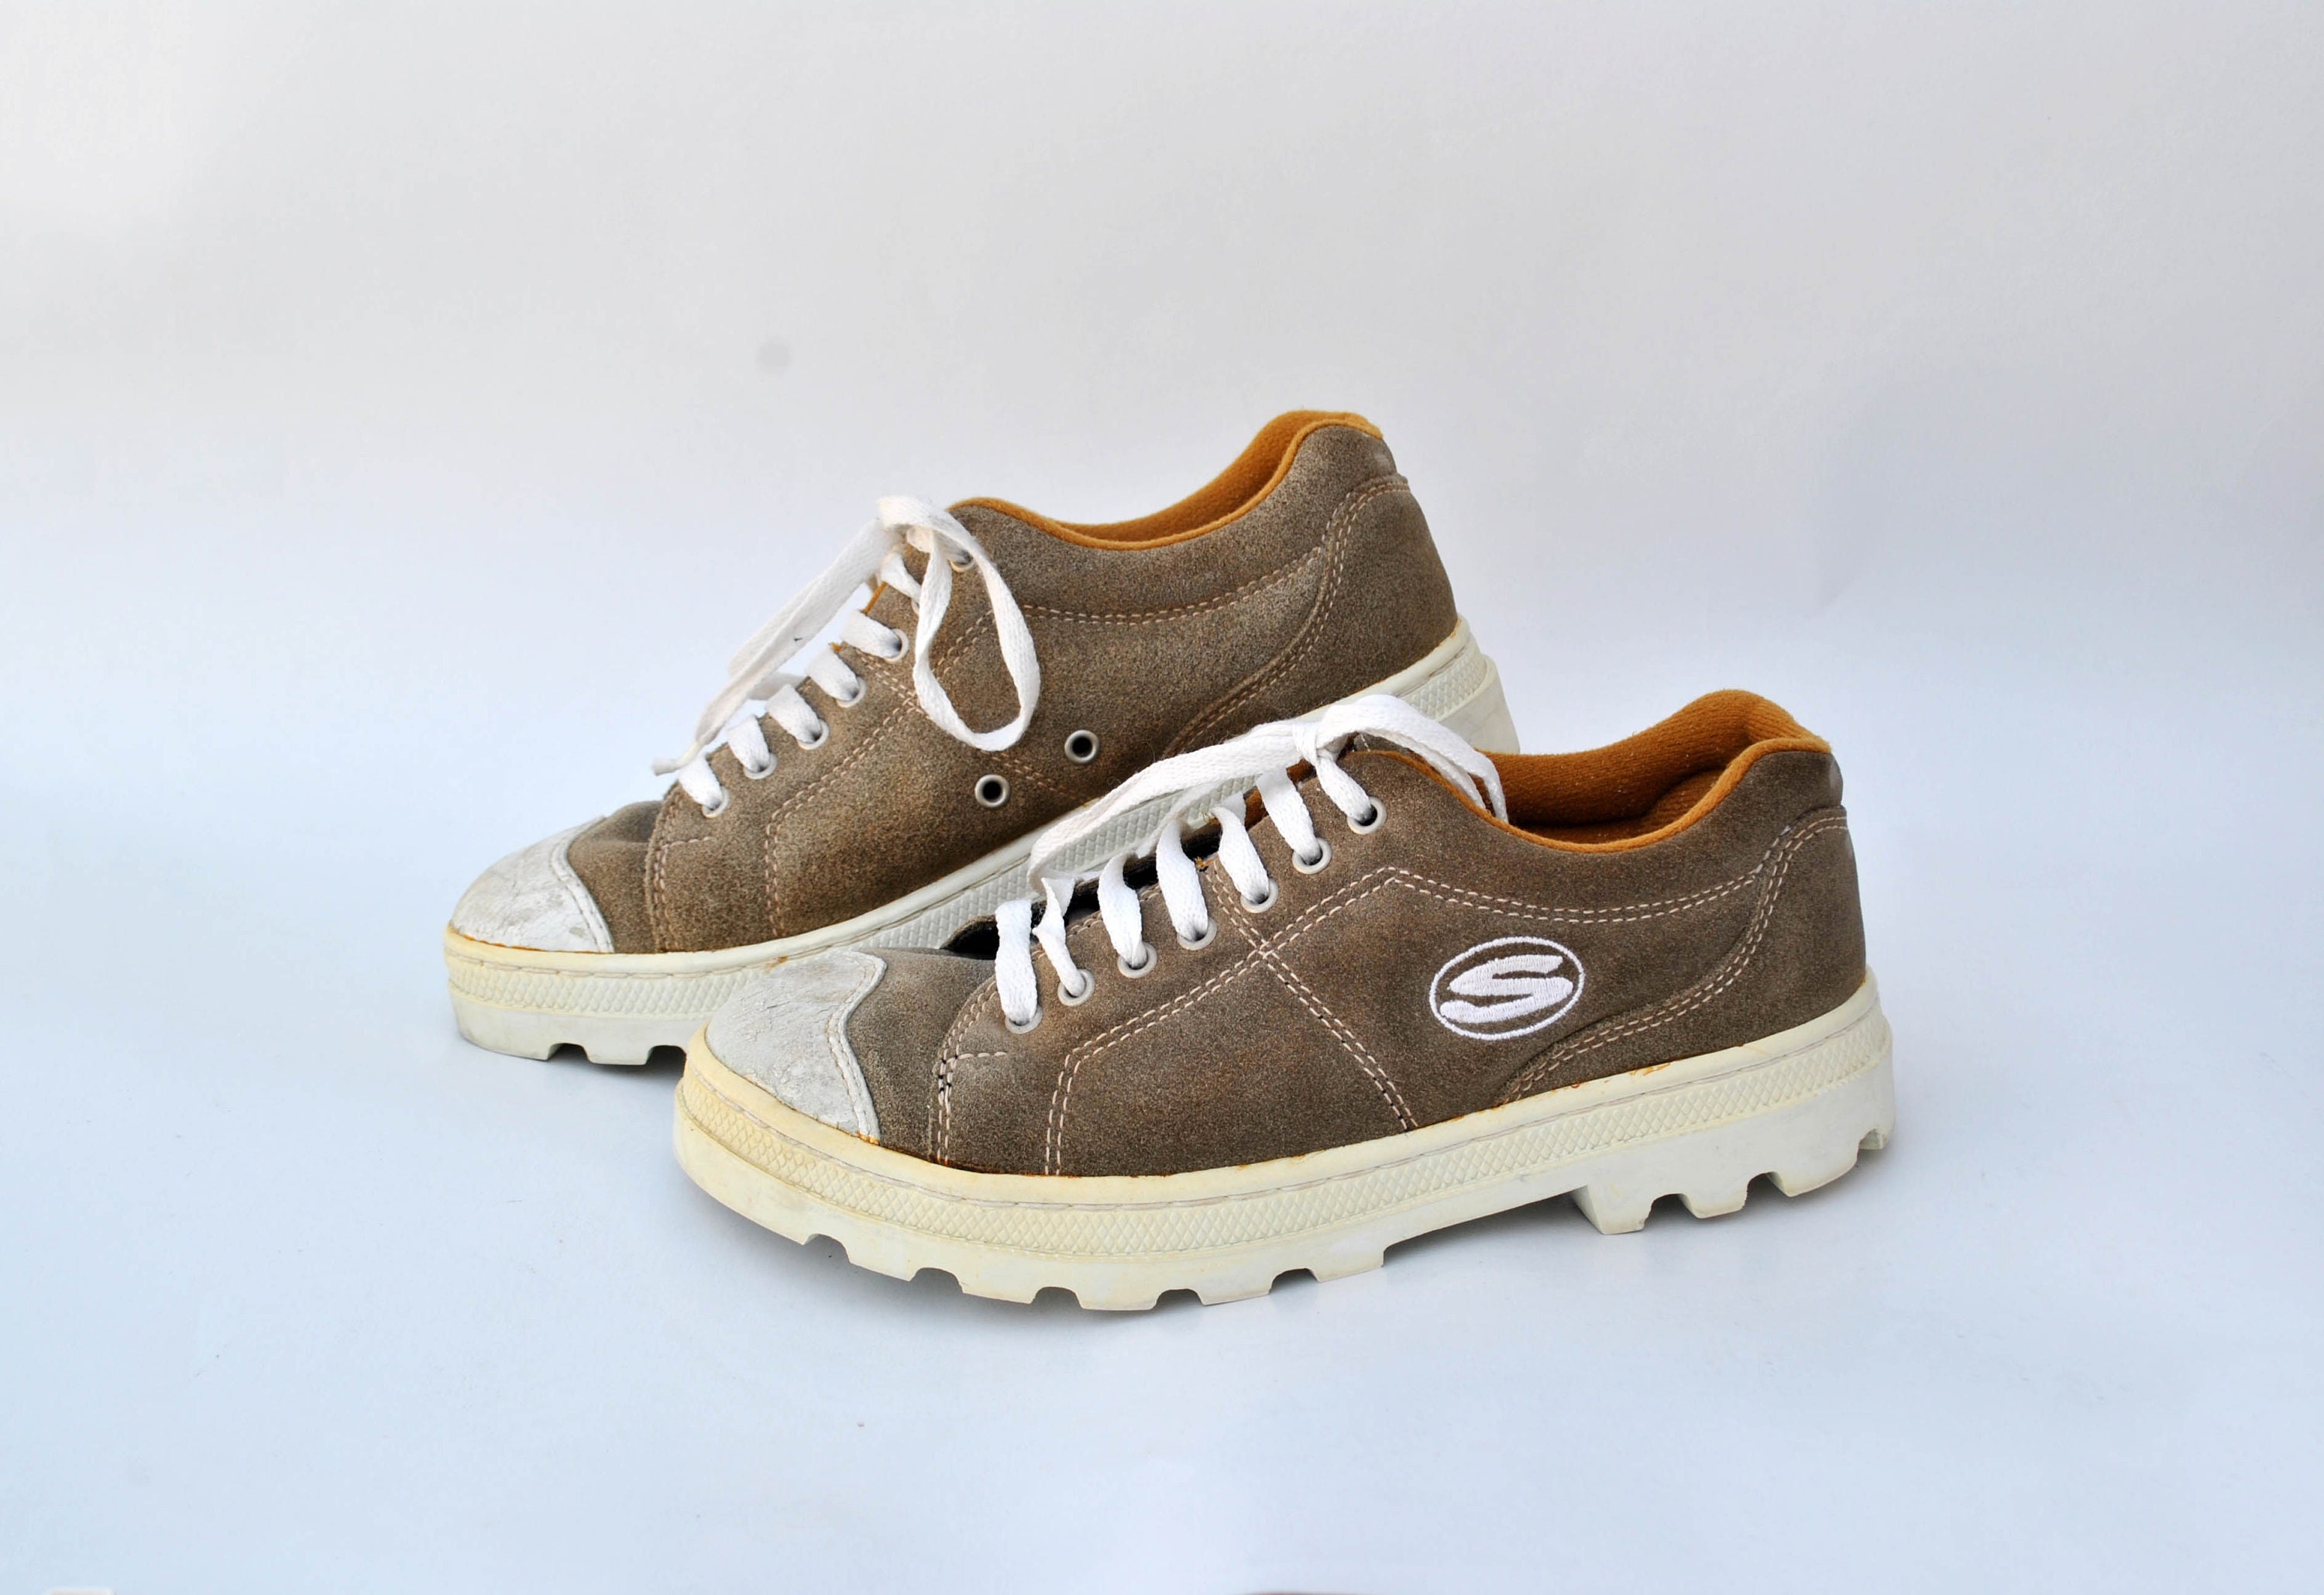 Vintage Skechers Coachella Shoes Natural All Star Shoes Low - Etsy